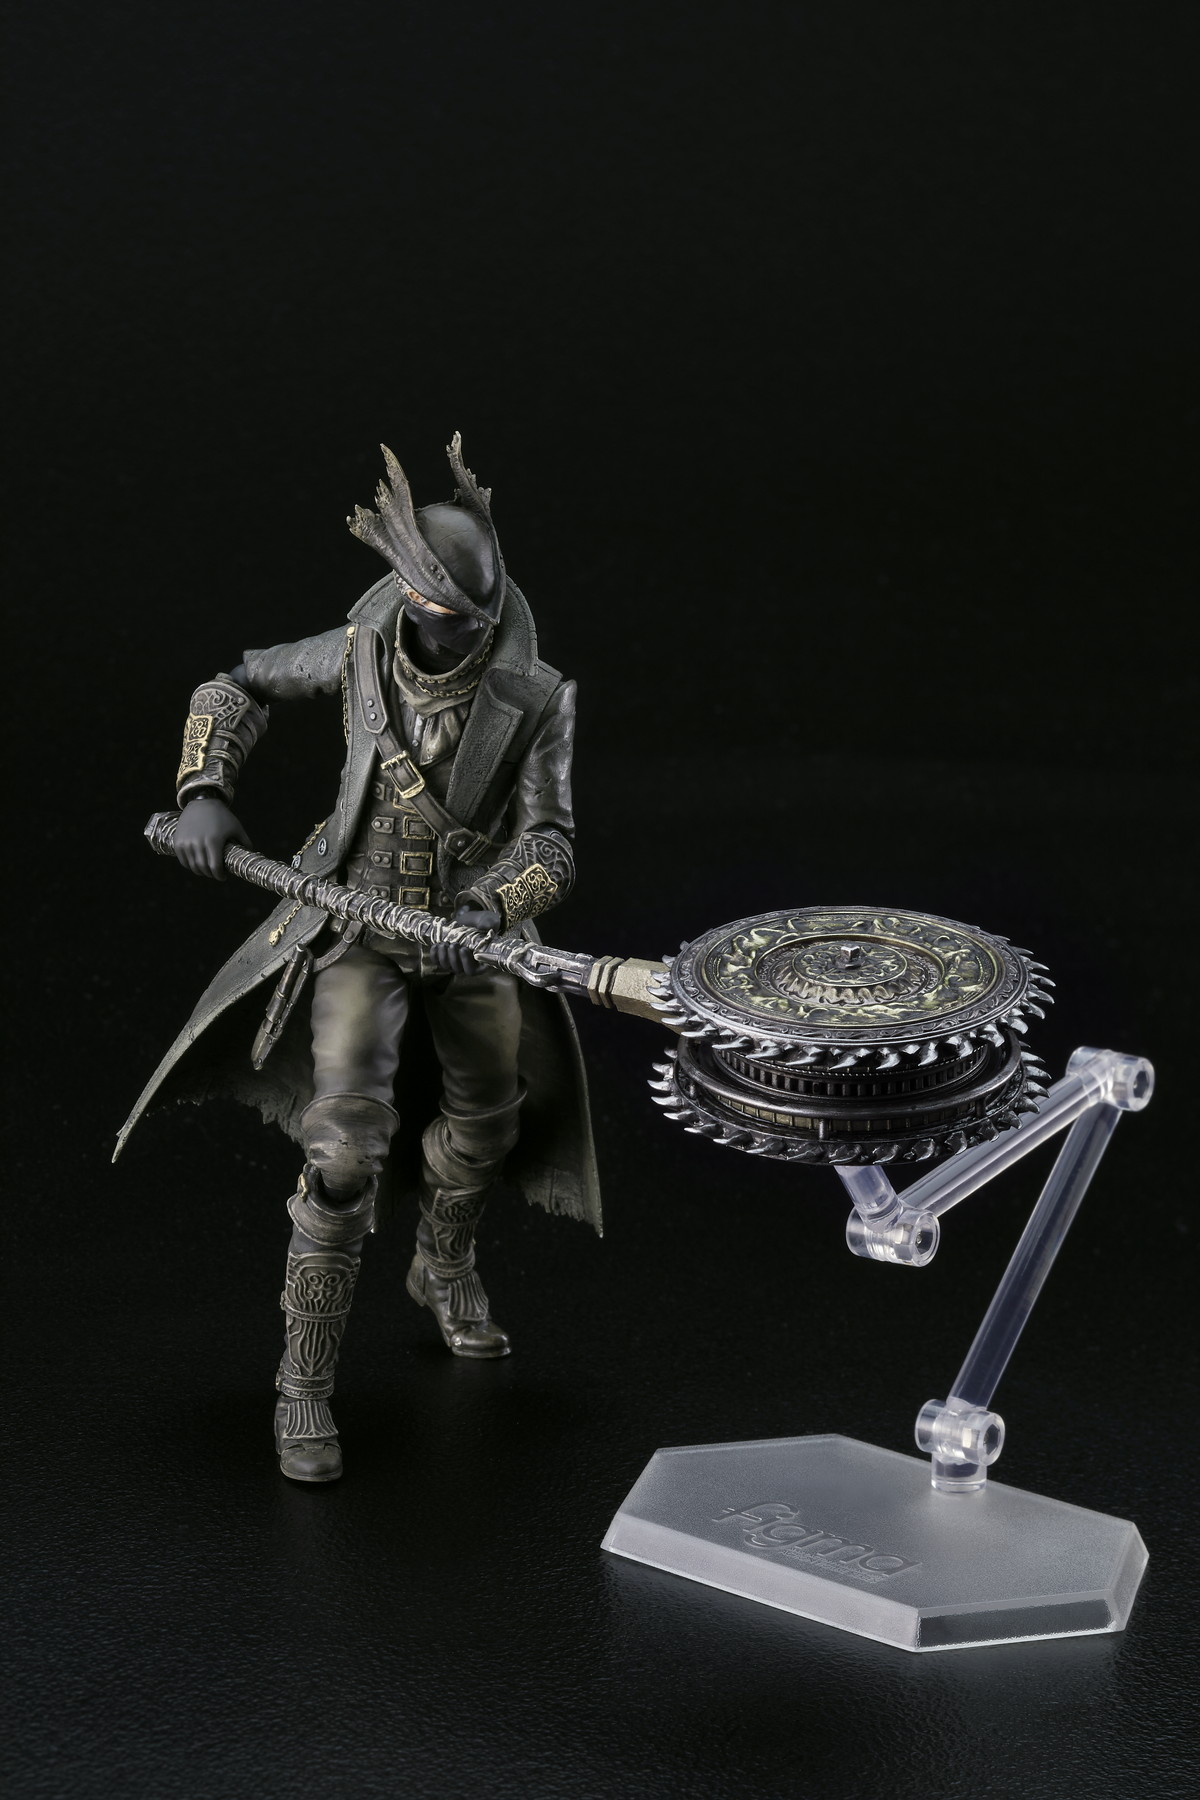 Bloodborne The Old Hunters Edition「figma 狩人The Old Hunters Edition」のフィギュア画像